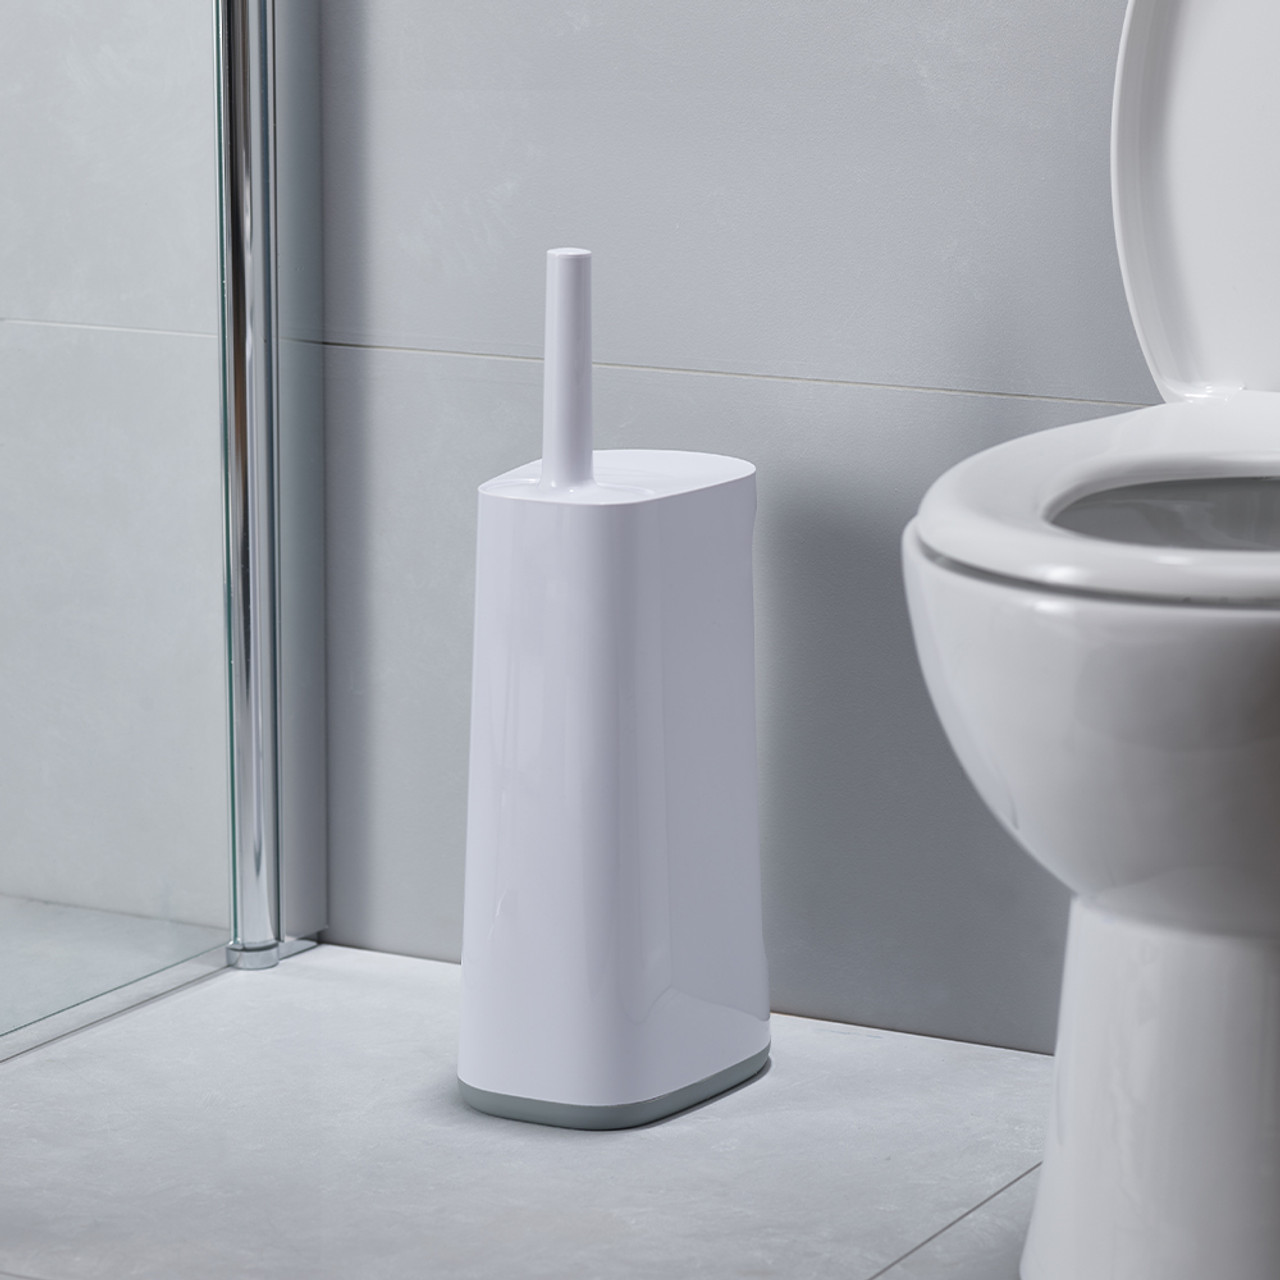 Where To Keep A Toilet Brush In The Bathroom